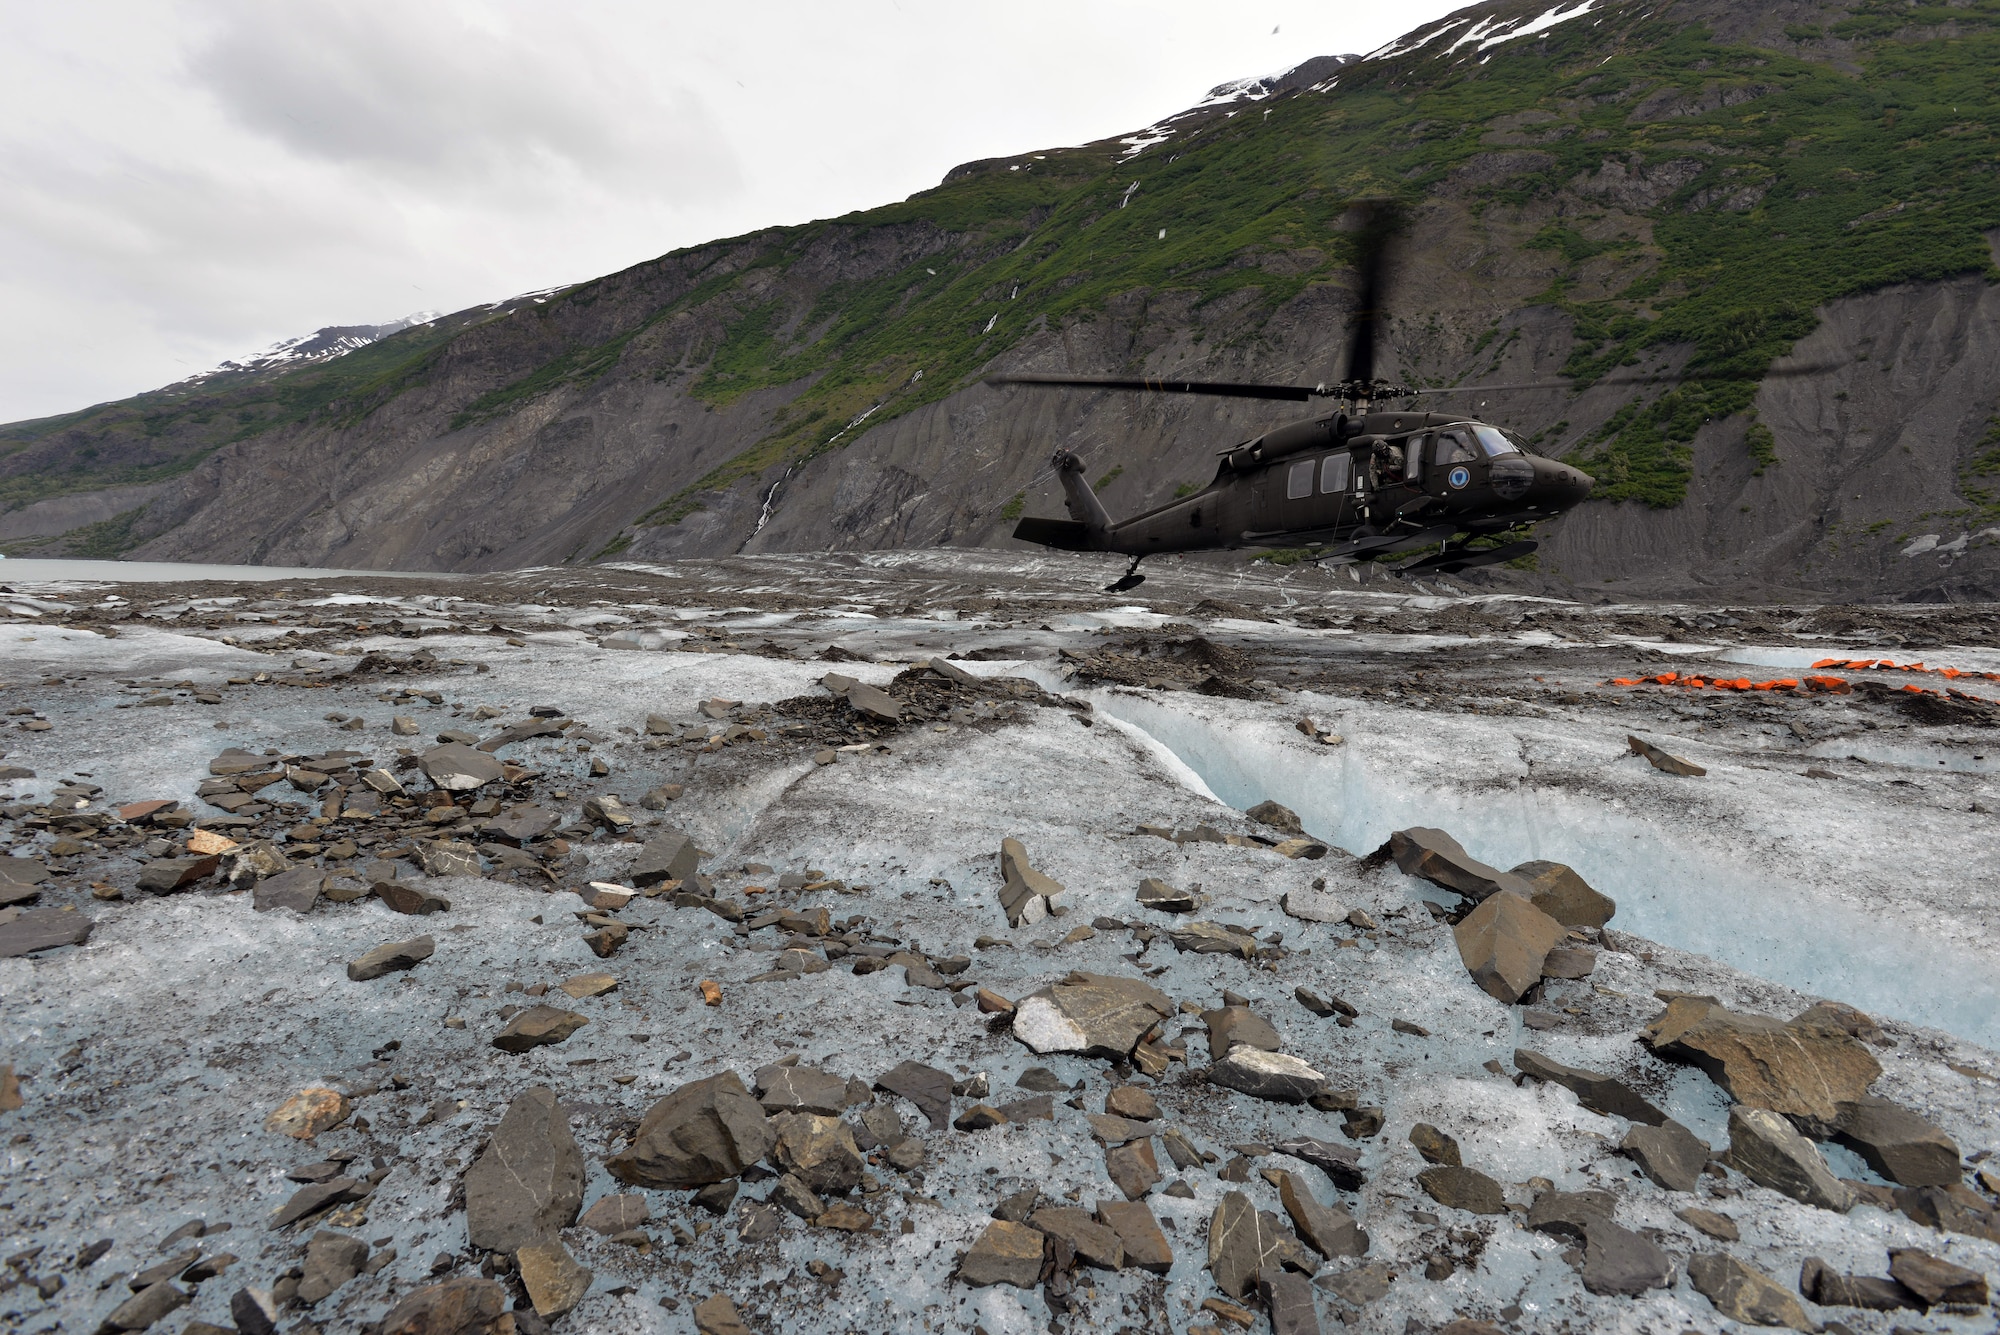 An Alaska National Guard UH-60 Black Hawk helicopter lands on Colony Glacier June 10 in order to transport servicemembers back to Joint Base Elmendorf-Richardson, Alaska. Each summer since 2012 Alaskan Command has supported Operation Colony Glacier by removing aircraft debris and assisting in the recovery of human remains to ensure closure for families who have lost loved ones. (U.S. Air Force photo/Tech. Sgt. John Gordinier)